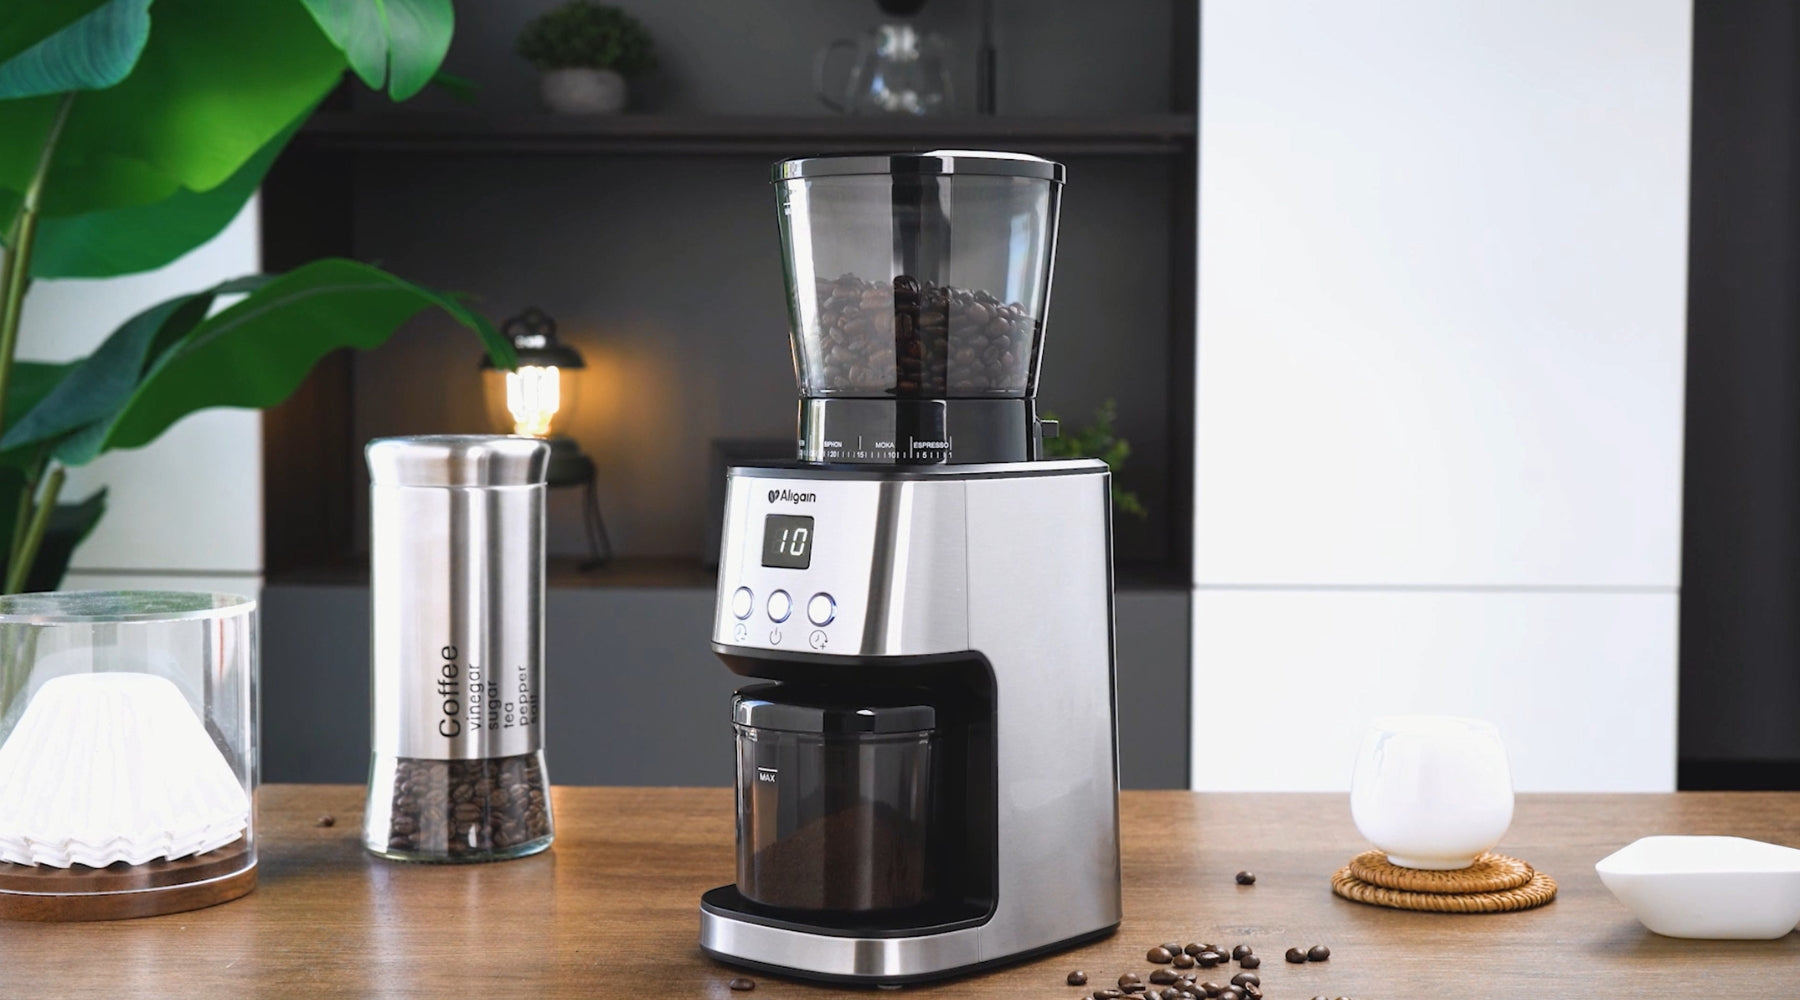 What factors should you consider when selecting a coffee grinder?